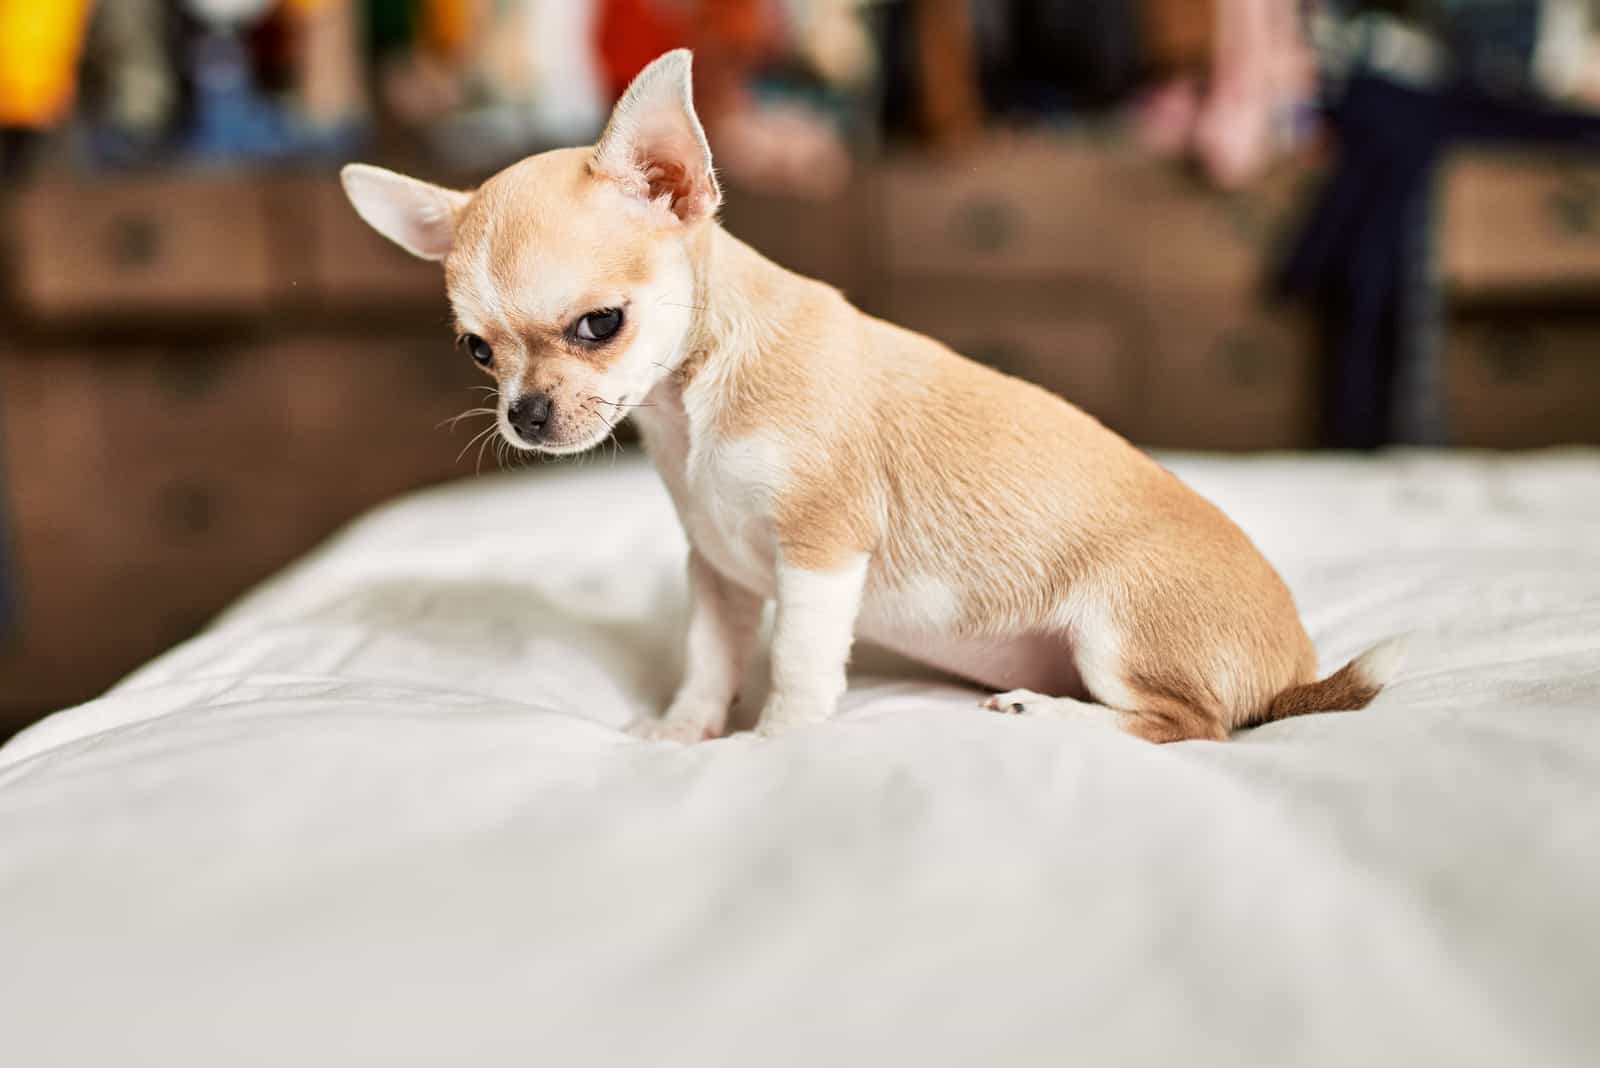 Chihuahua puppy sitting on pillow